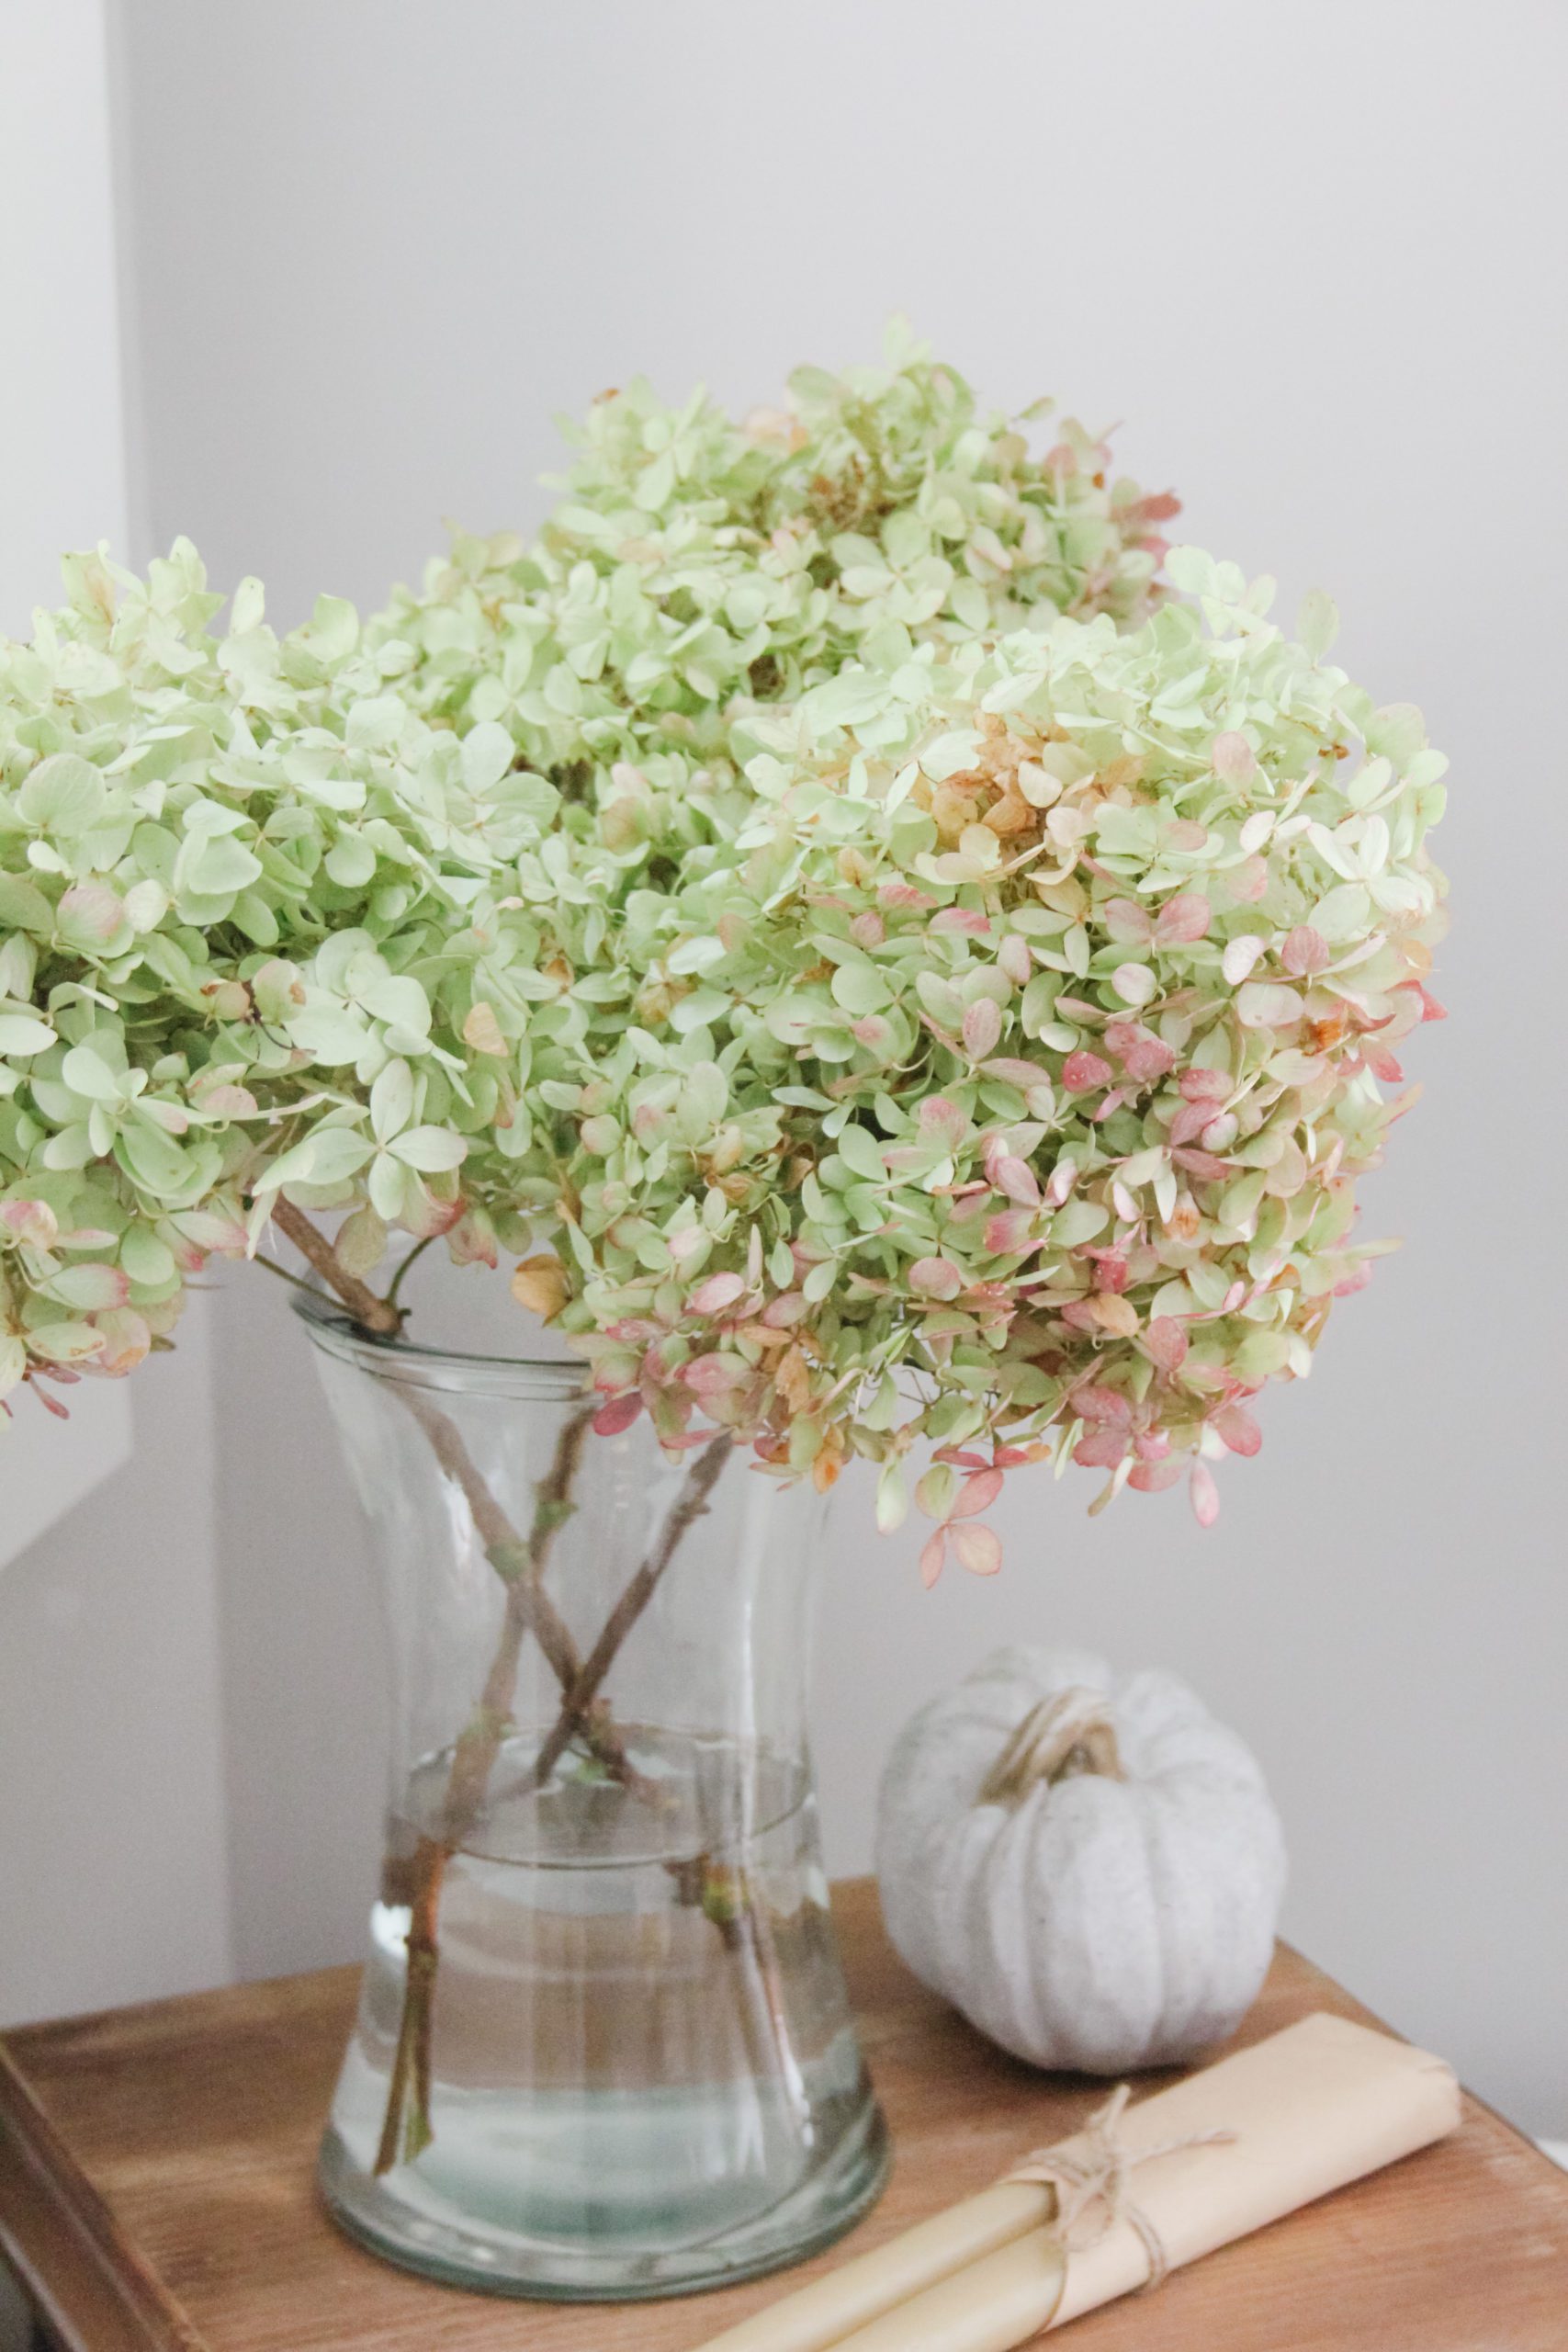 Dried limelight hydrangea stems in muted green and mauve colors in a glass vase with grey faux pumpkin and yellow candles on a farmhouse riser